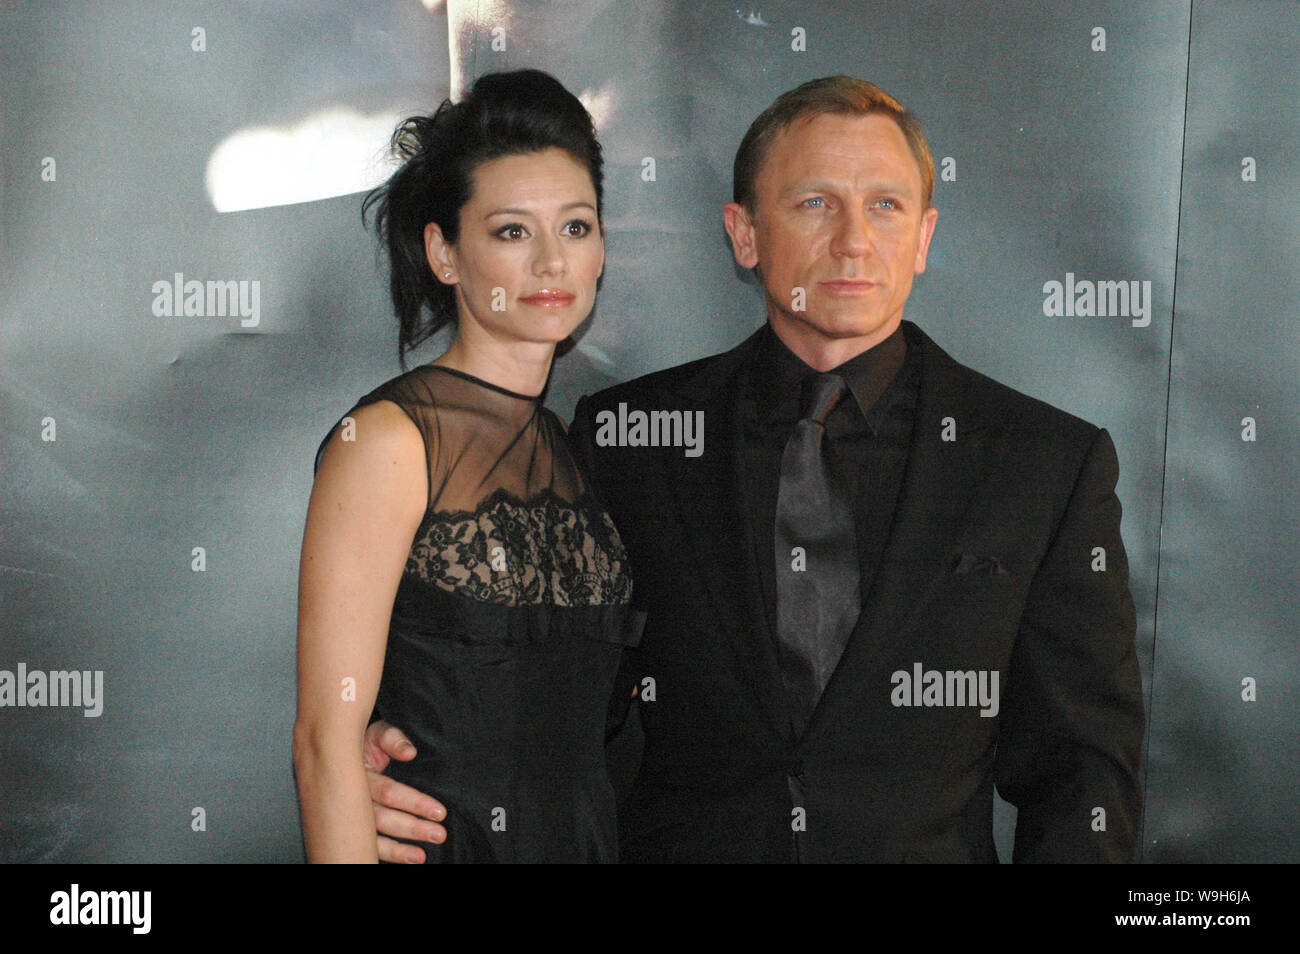 casino royale characters cast